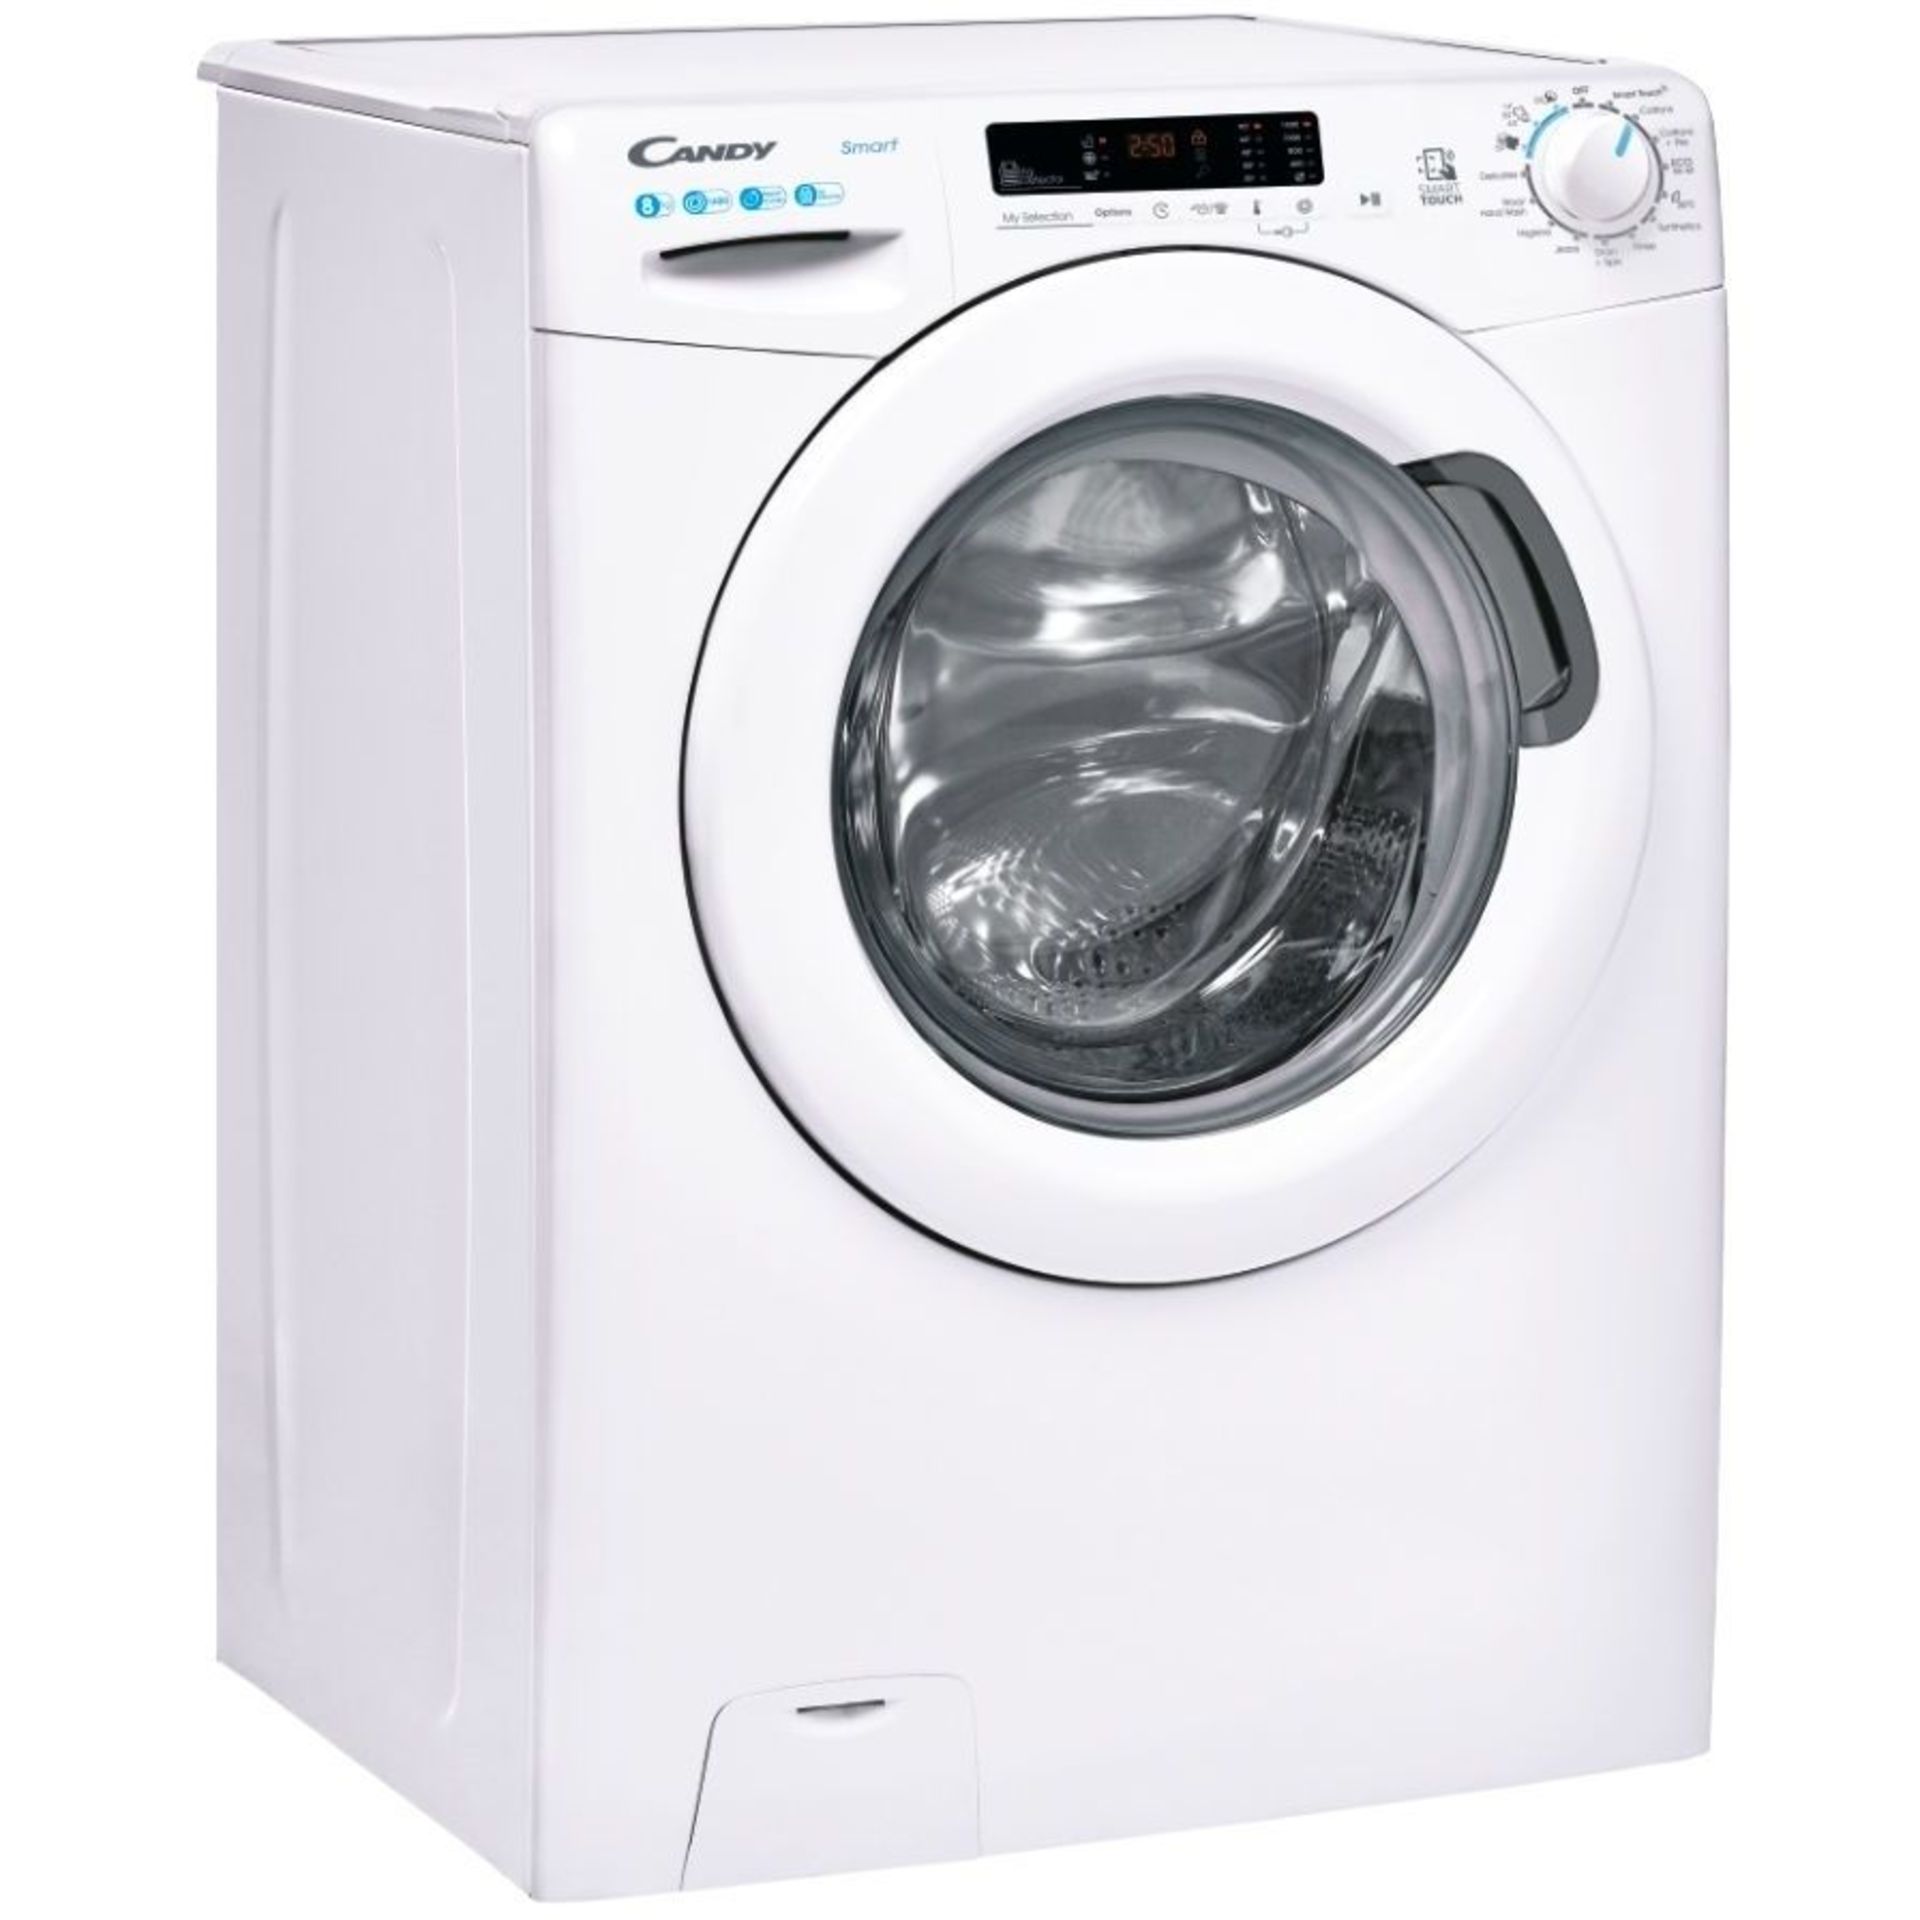 Candy CS 1482DE Washing Machine, 8kg, 1400 Spin, White. - S2. RRP £419.00. Let Candy help your day - Image 2 of 2